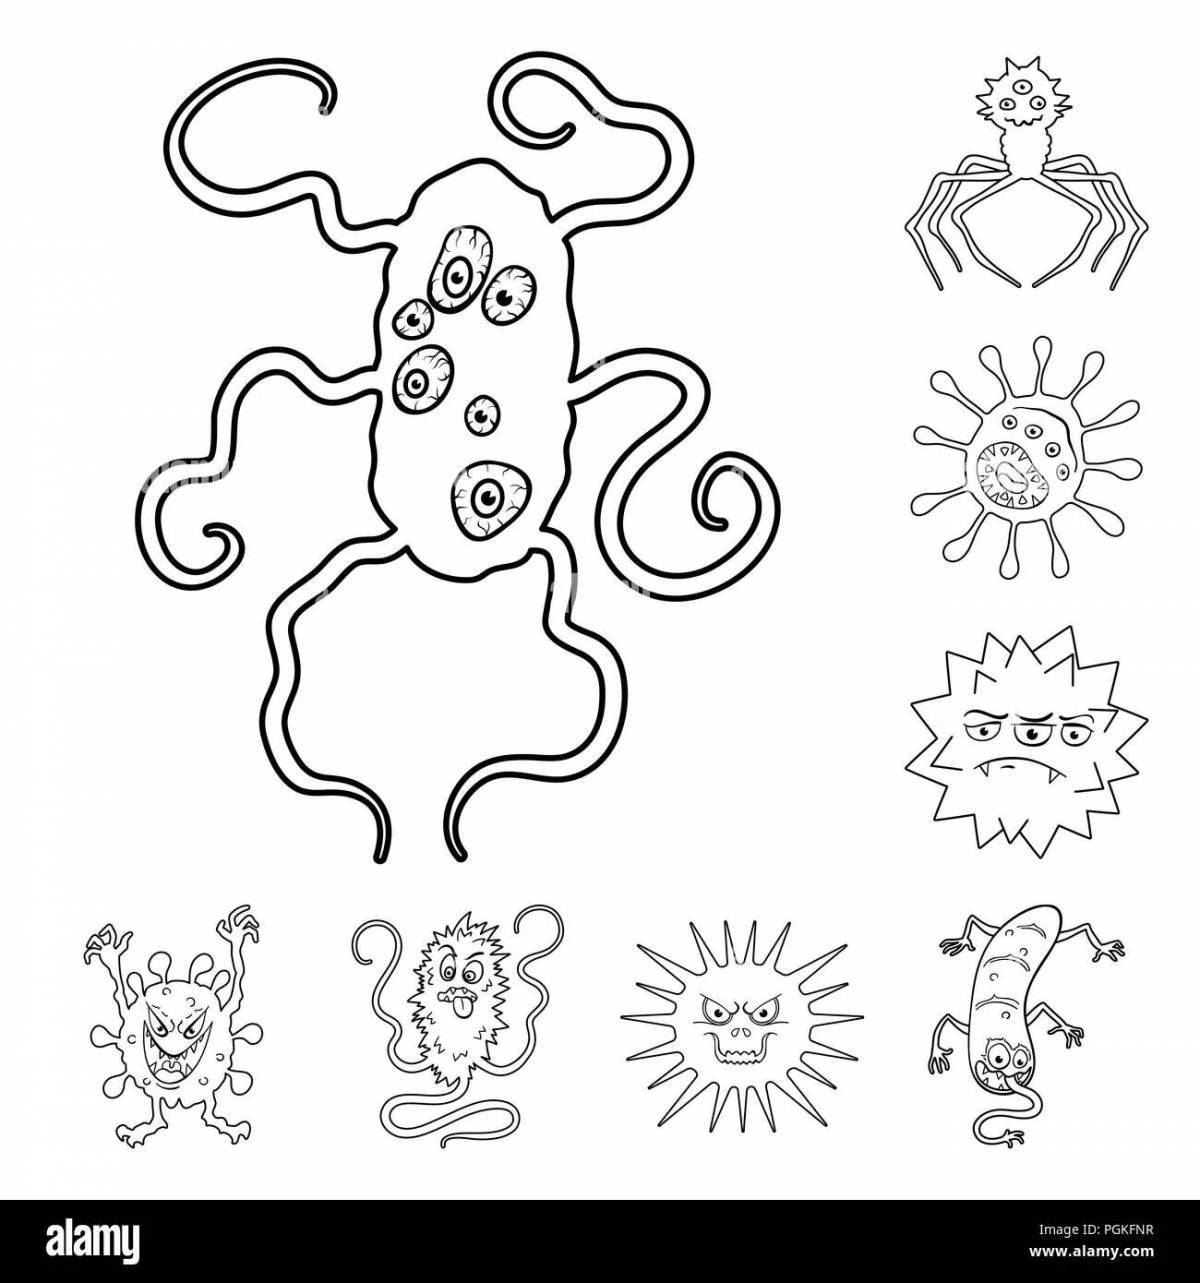 Funny microbes coloring pages for kids